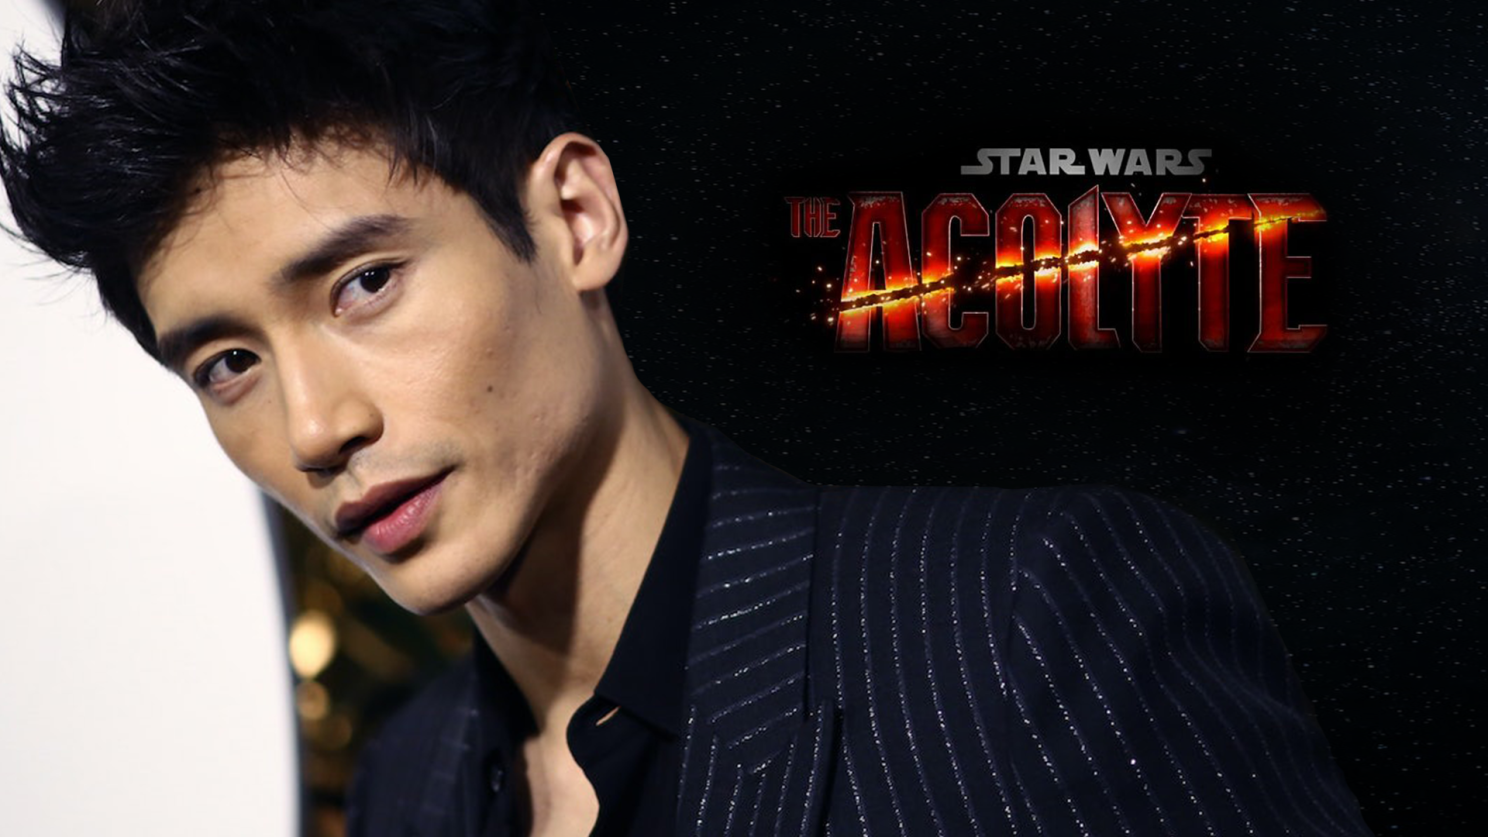 Manny Jacinto joins The Acolyte